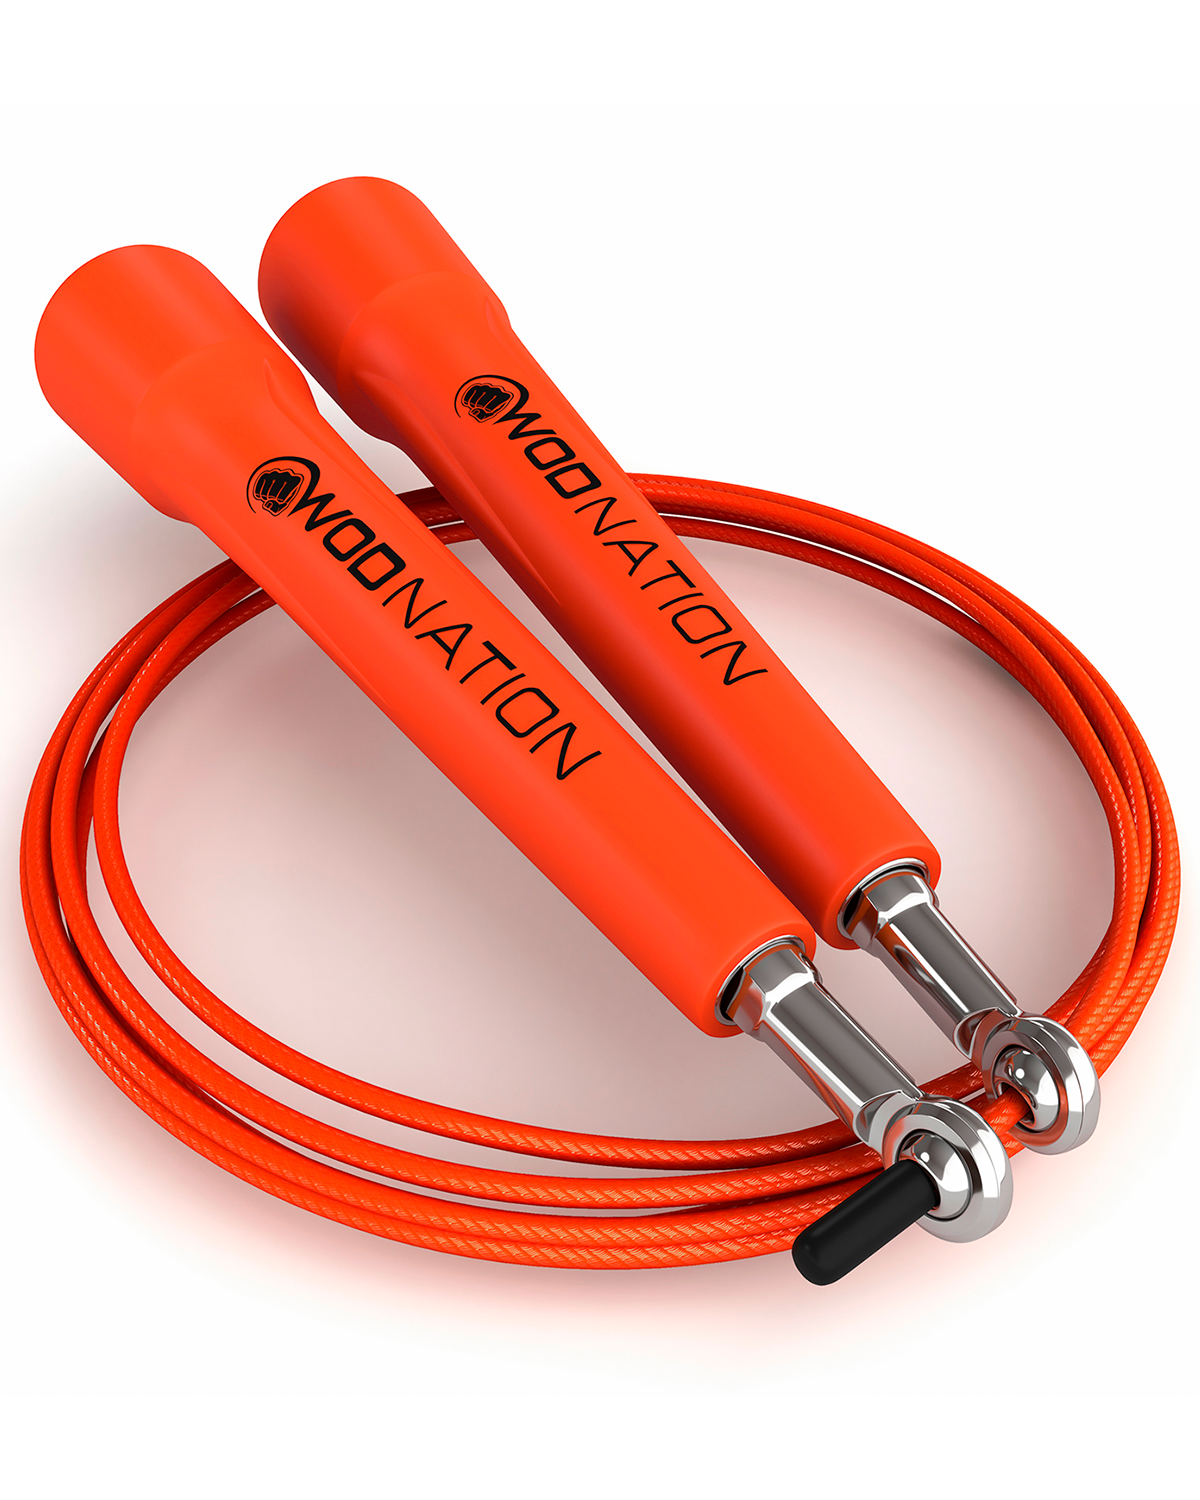 WOD Nation Speed Jump Rope